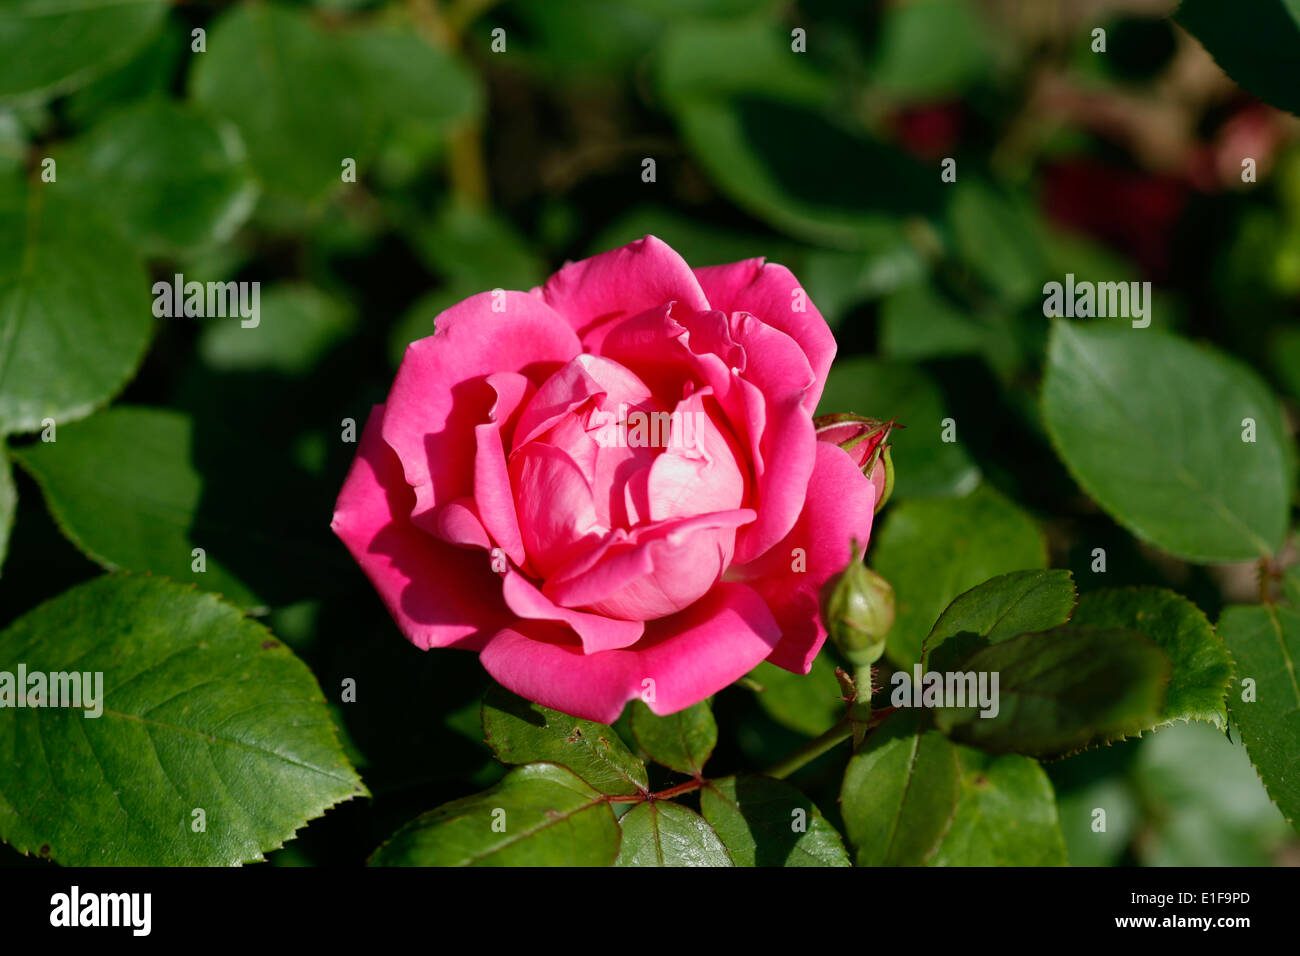 Pink Double Knock Out rose introduced in 2007. Stock Photo